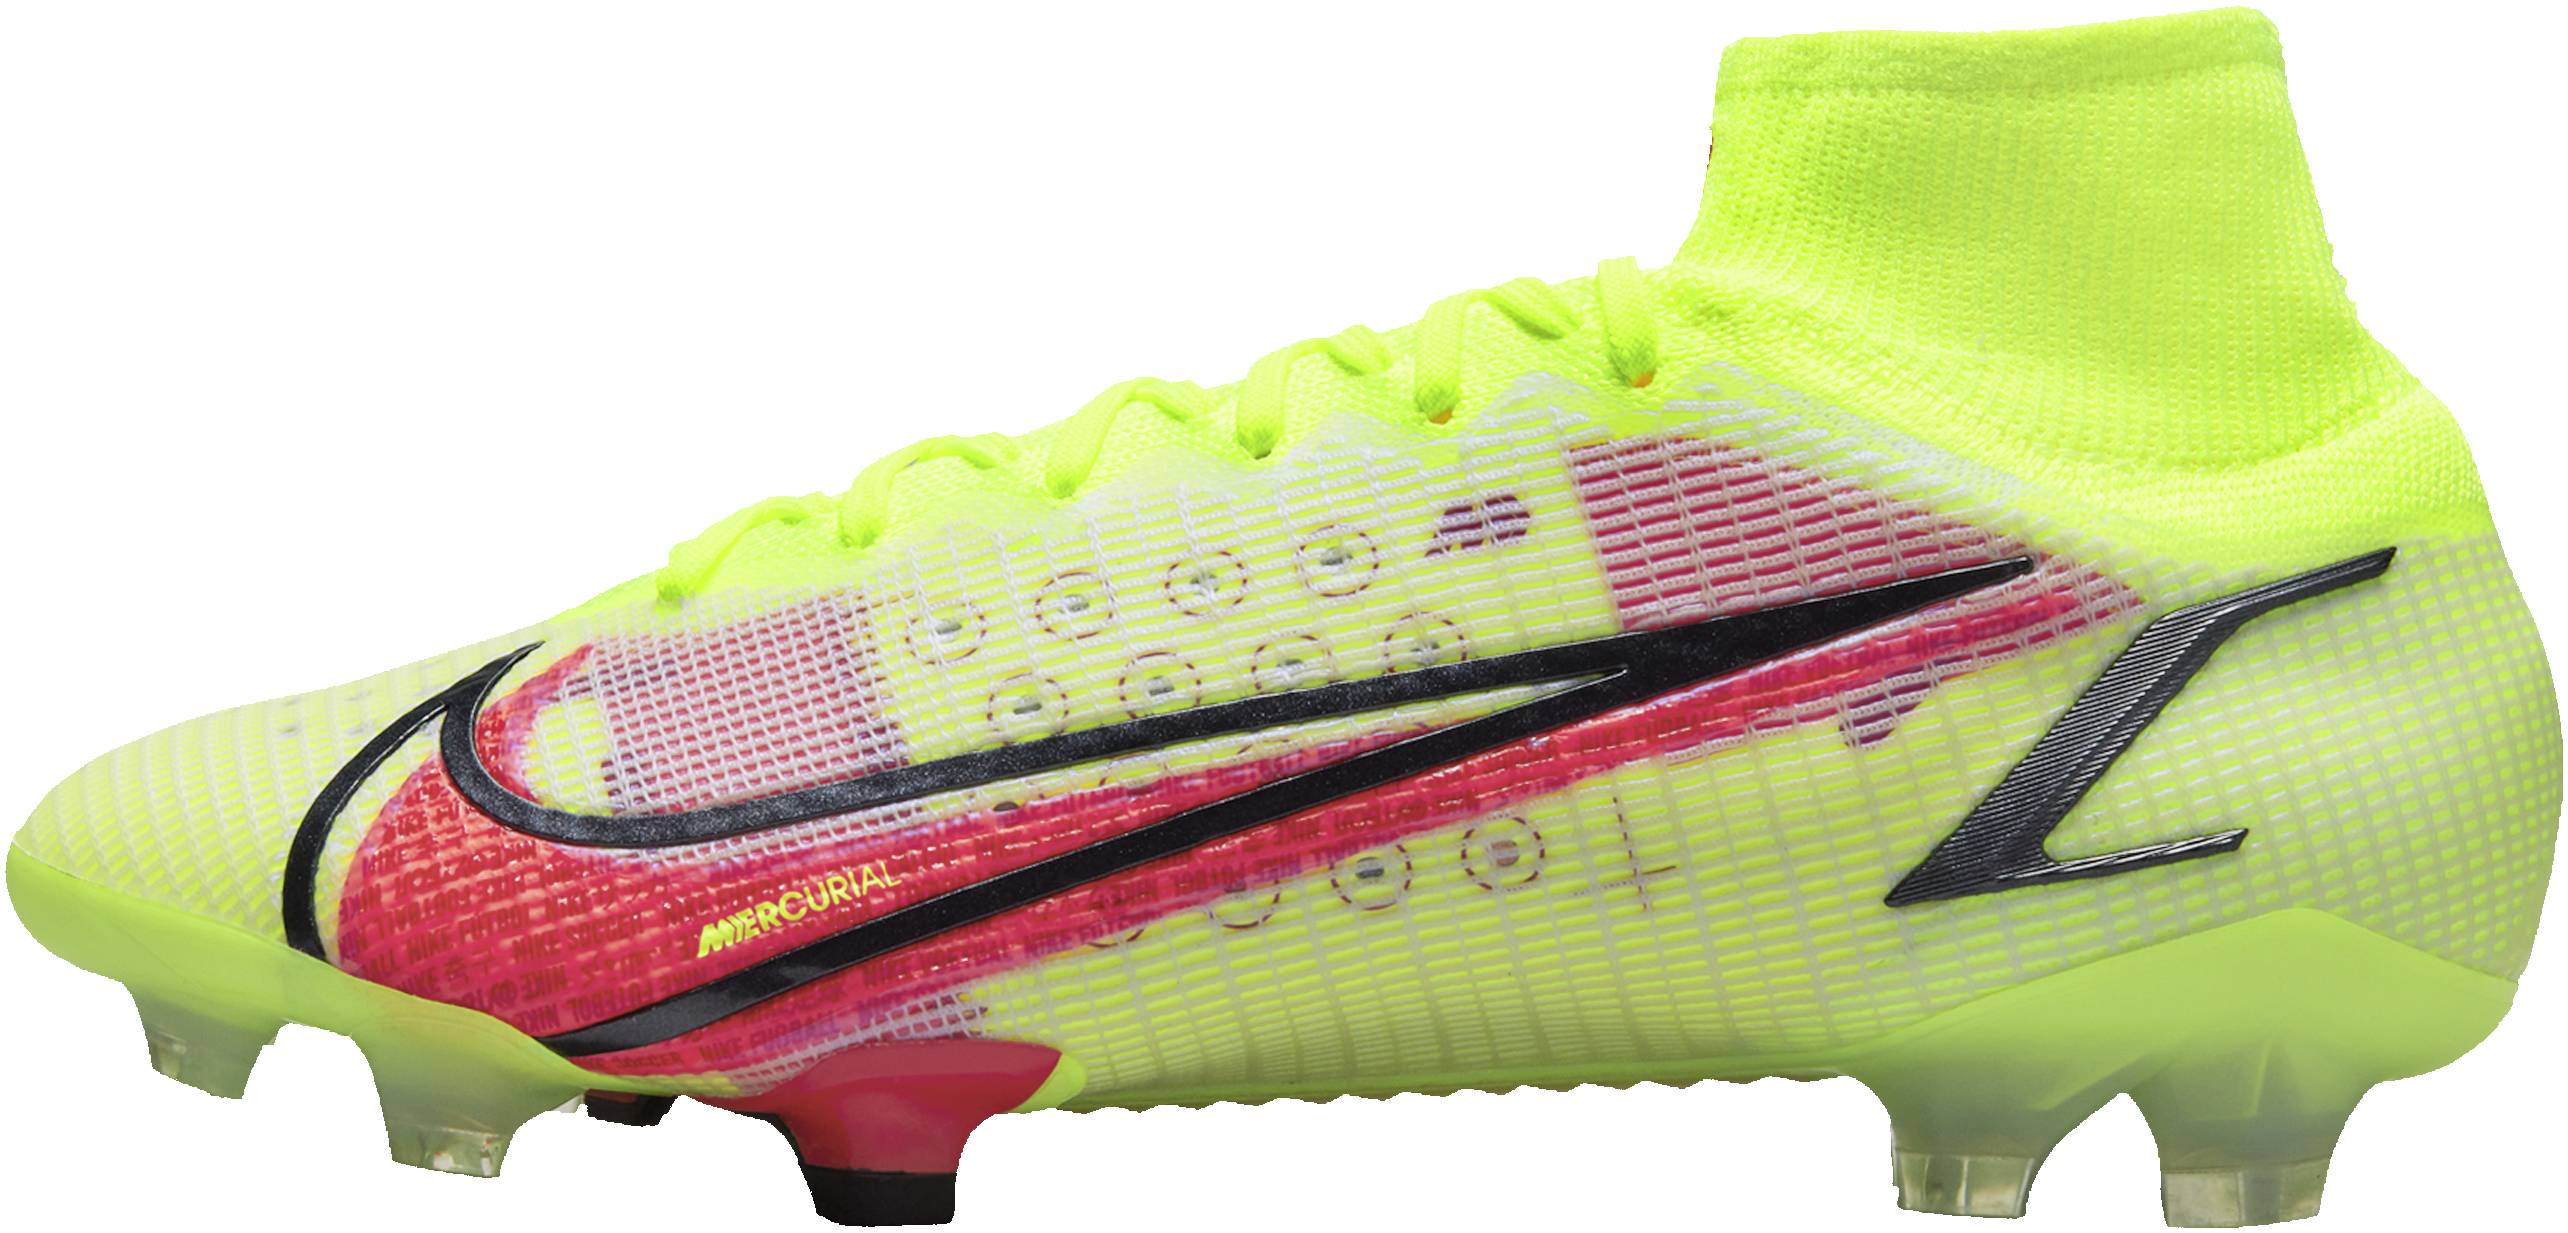 Nike Mercurial Superfly 8 Elite FG Review 2022, Facts, Deals ($185 